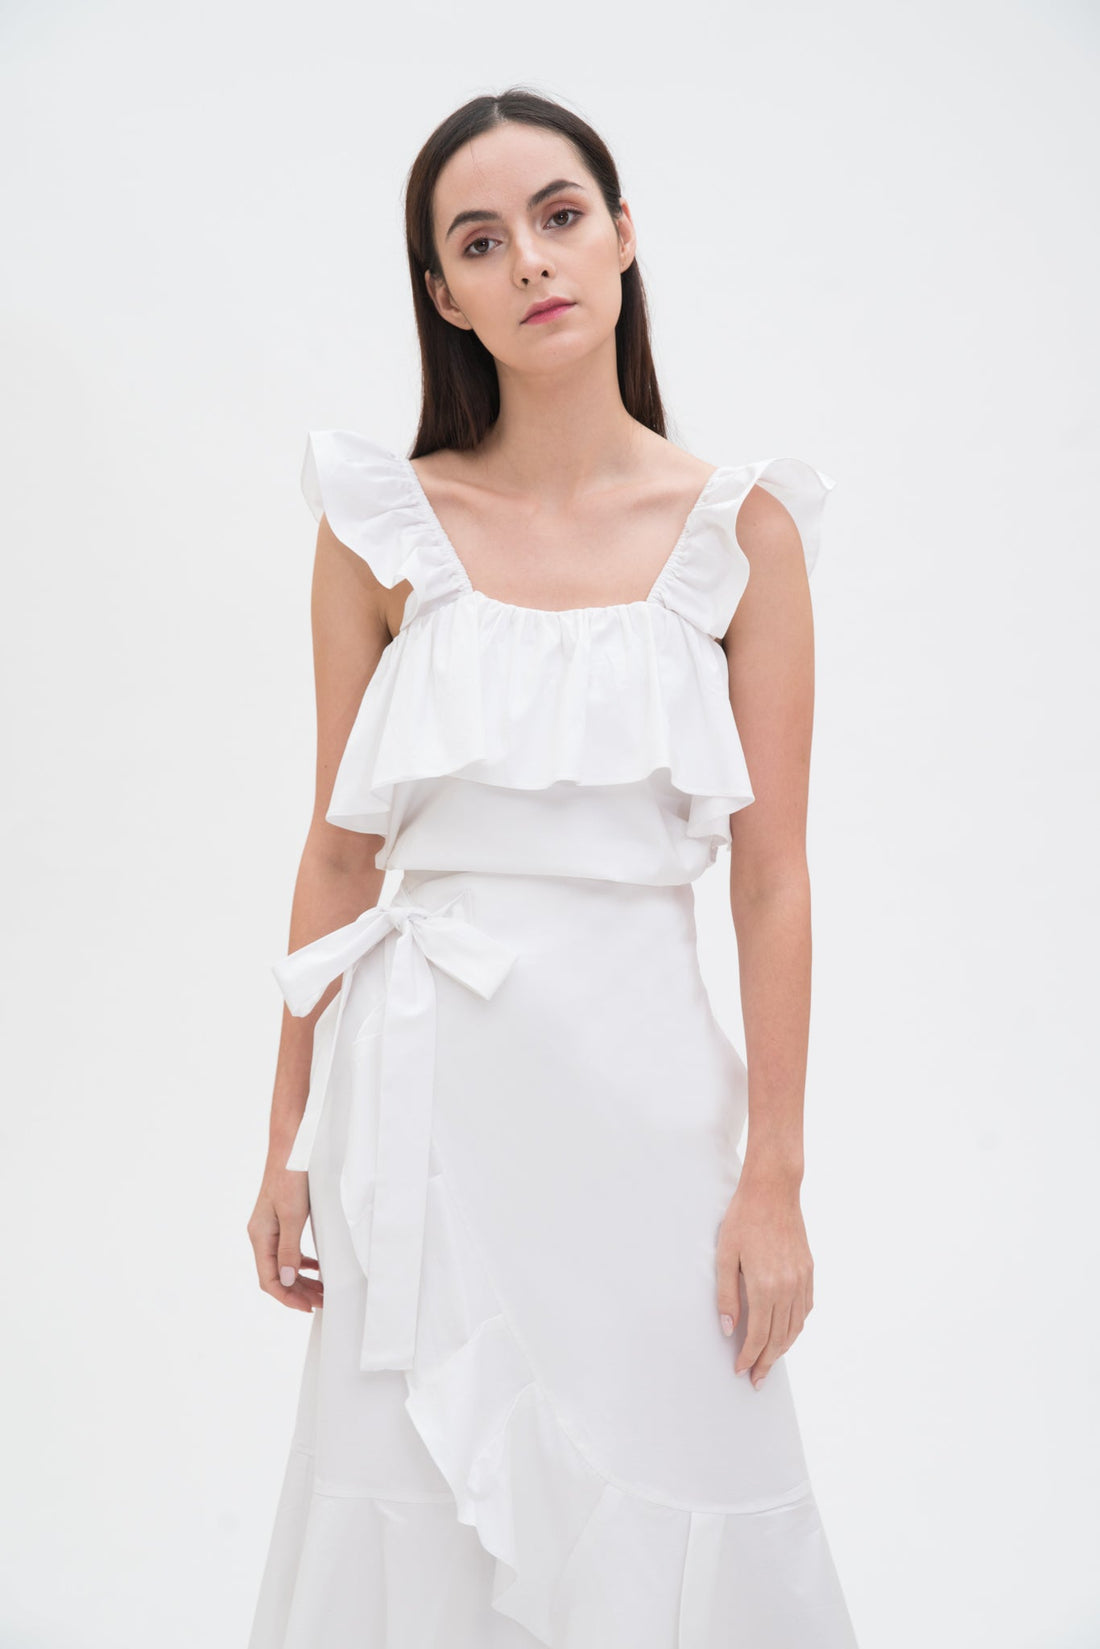 A woman is wearing a white ruffled scrappy dress.